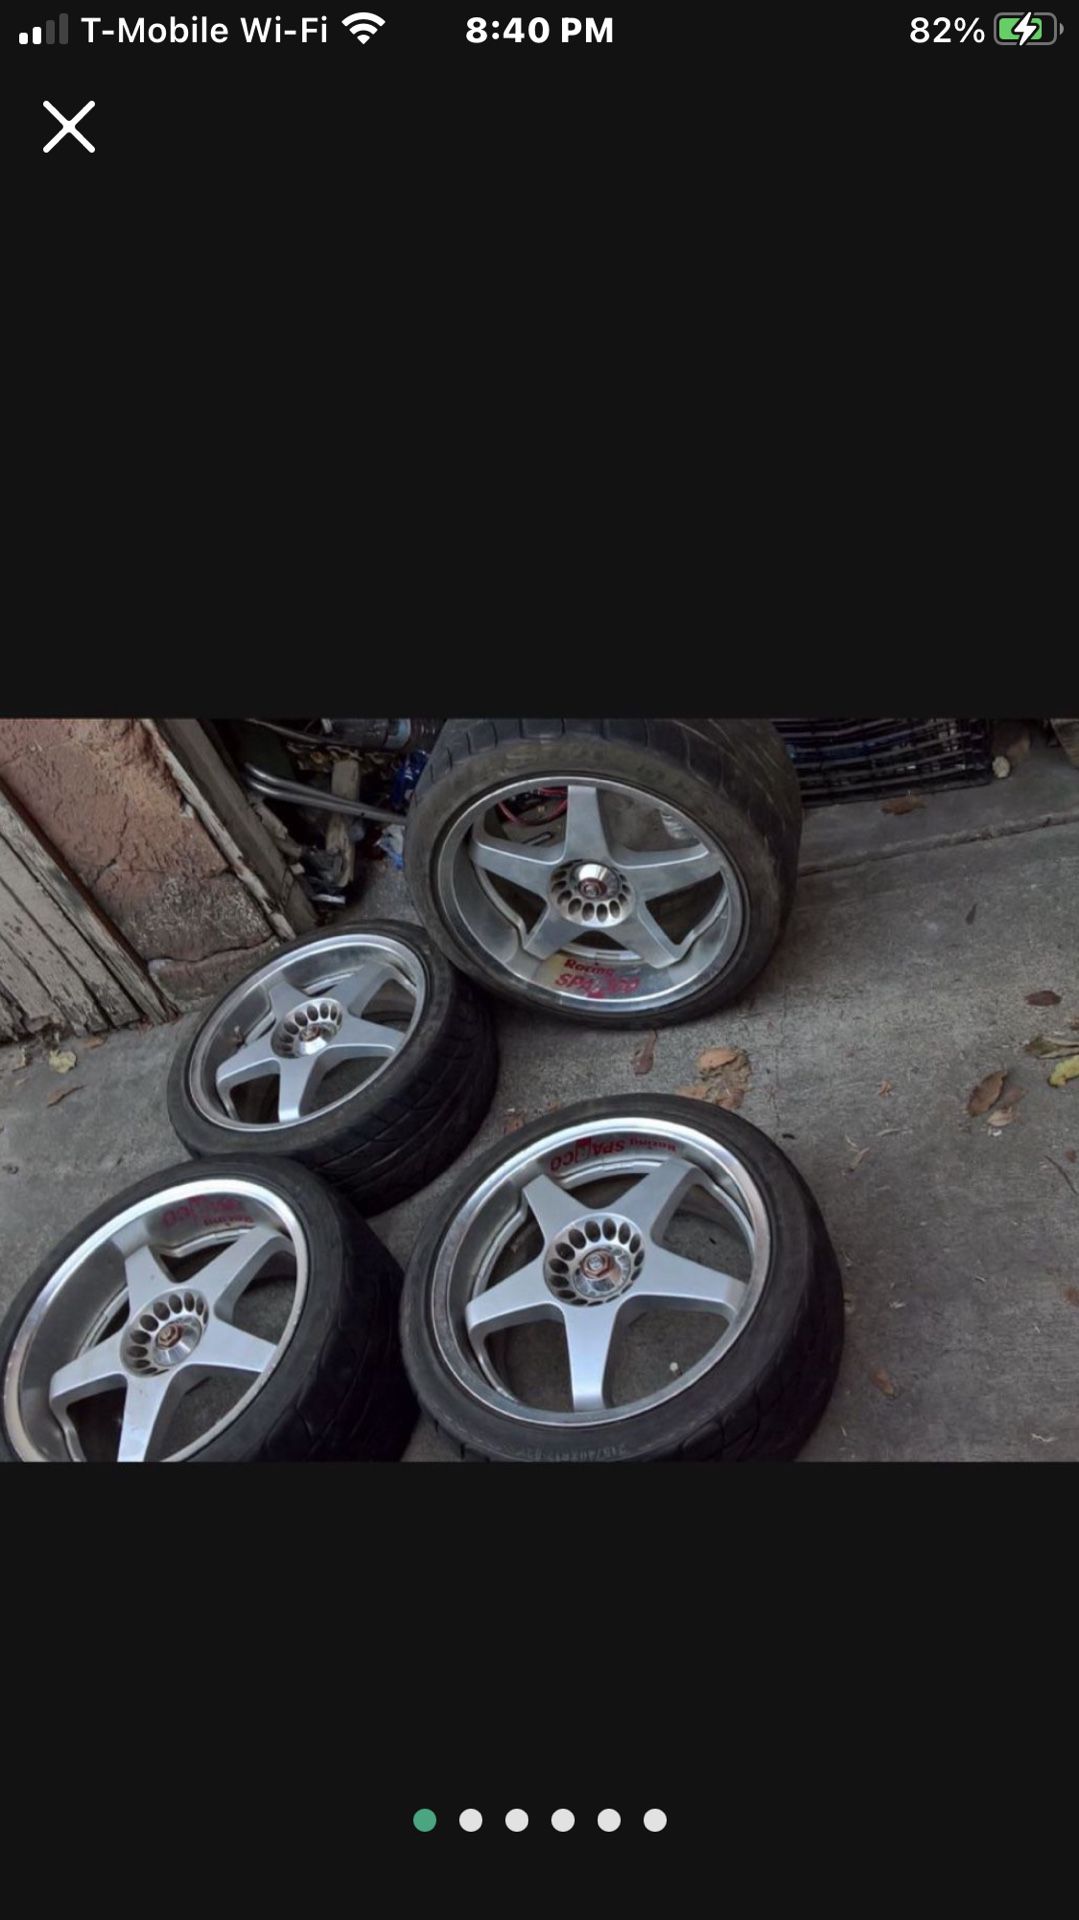 $1,200 Real Japanese JDM Sparco Wheels 5 X 114 From NSX Acura Fits Most Rear Wheel Drive 